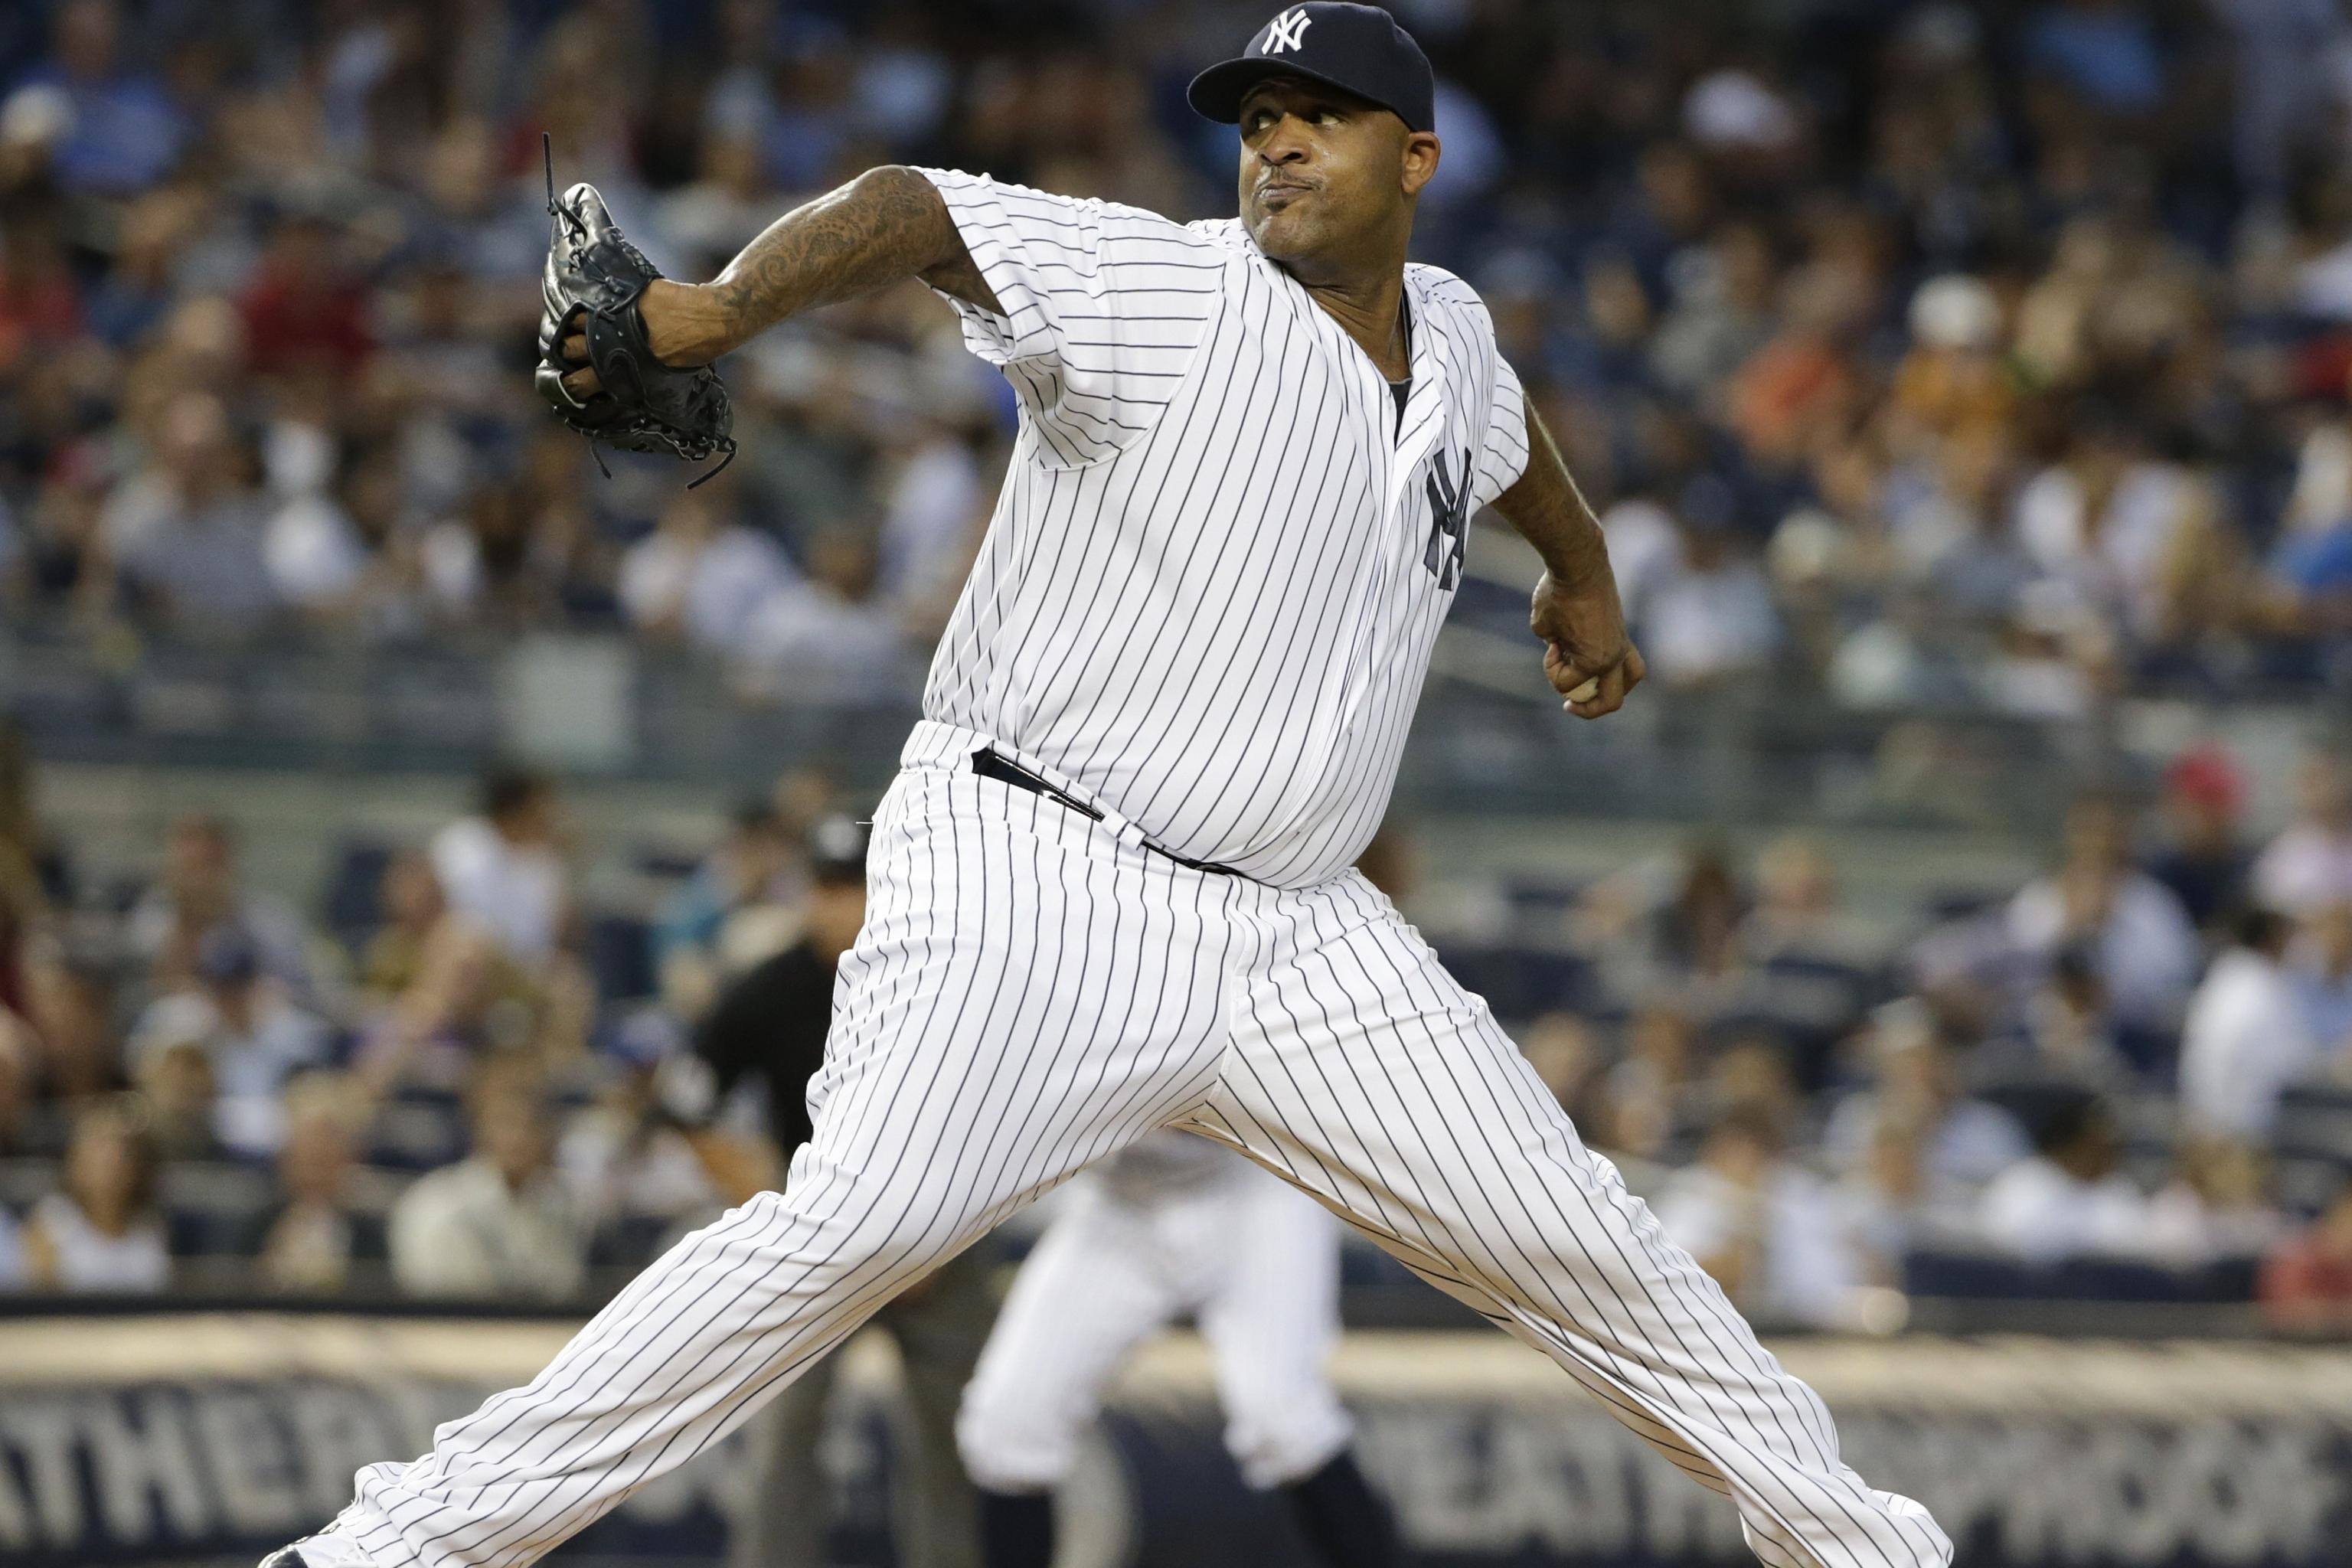 CC Sabathia nearly lost everything to alcohol